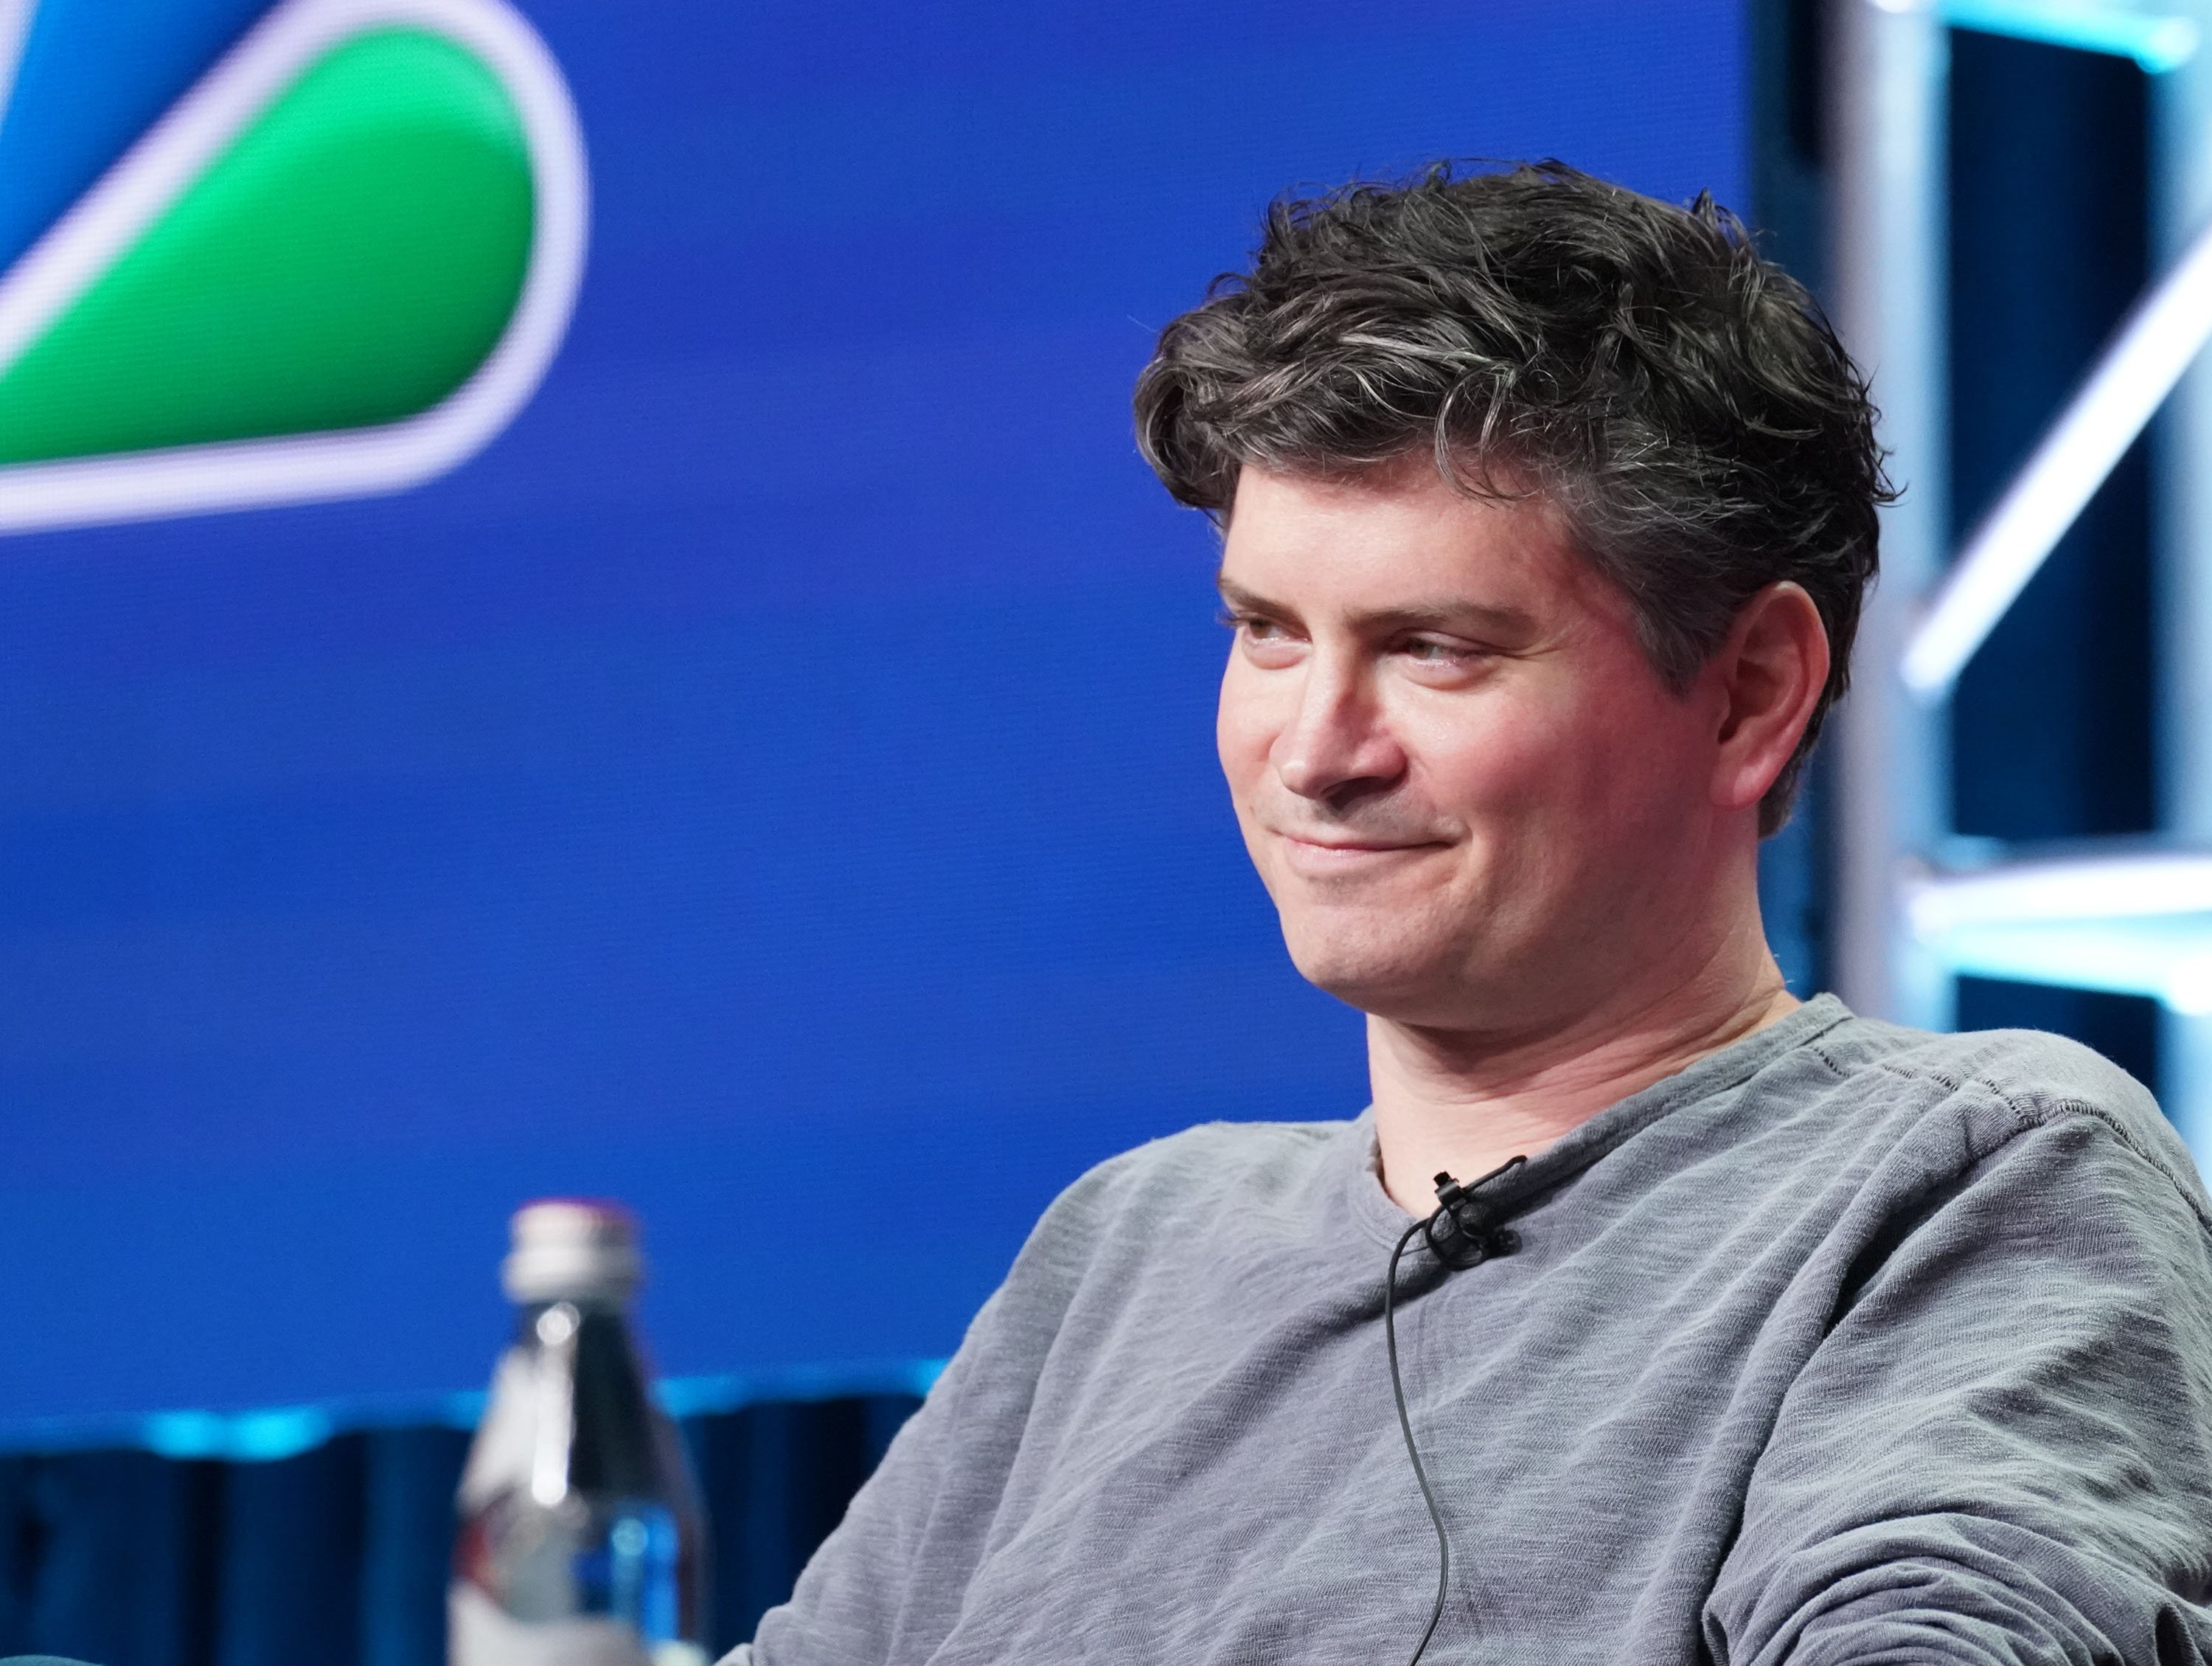 Michael Schur Makes the Best TV Shows and His Net Worth Proves It